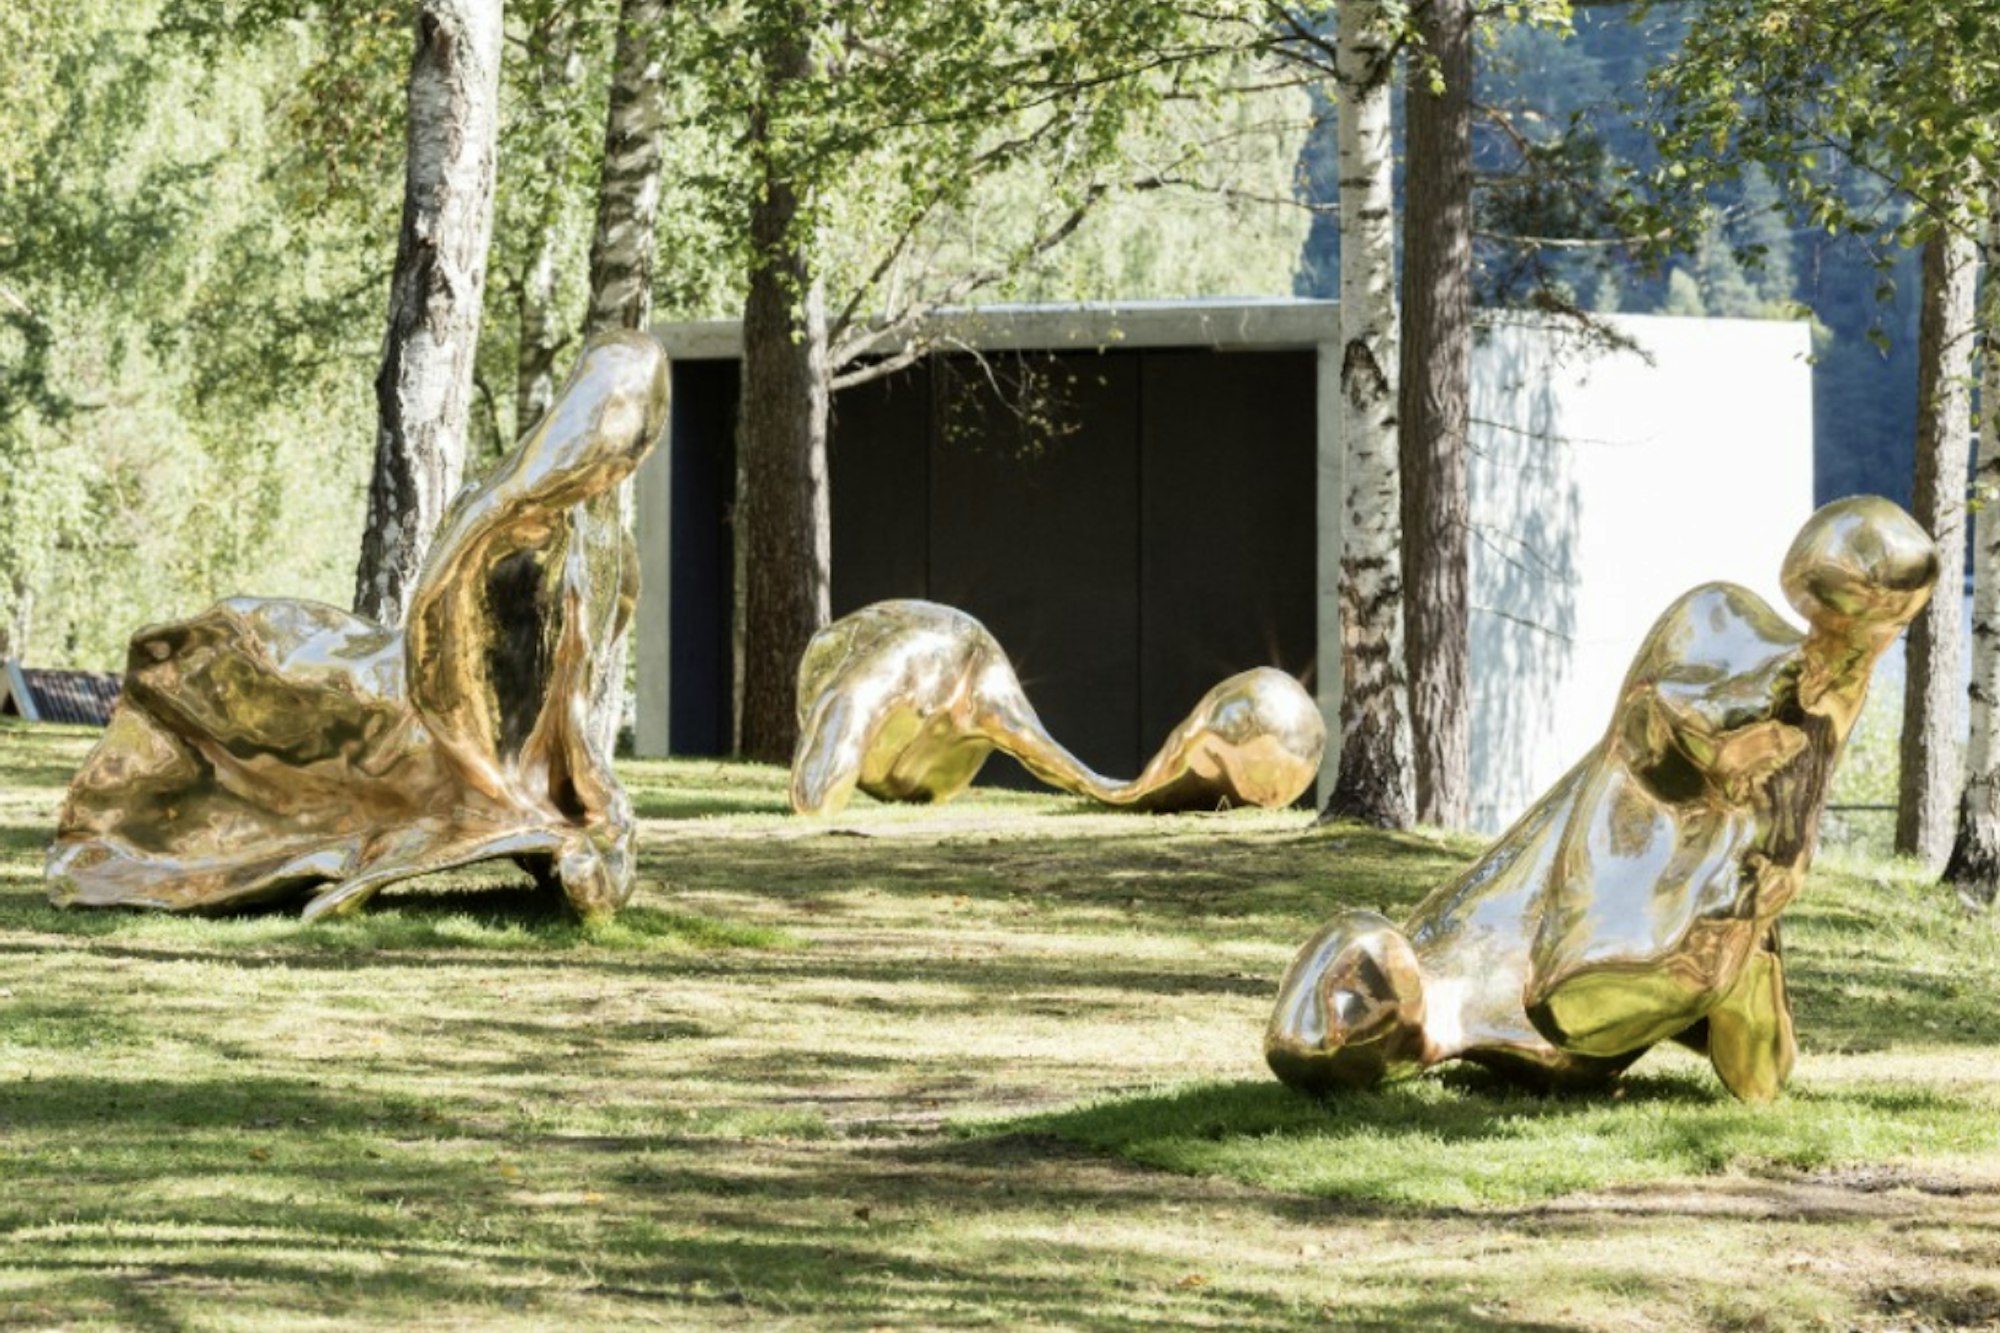 Three sculptures, gold, shiny, abstract forms